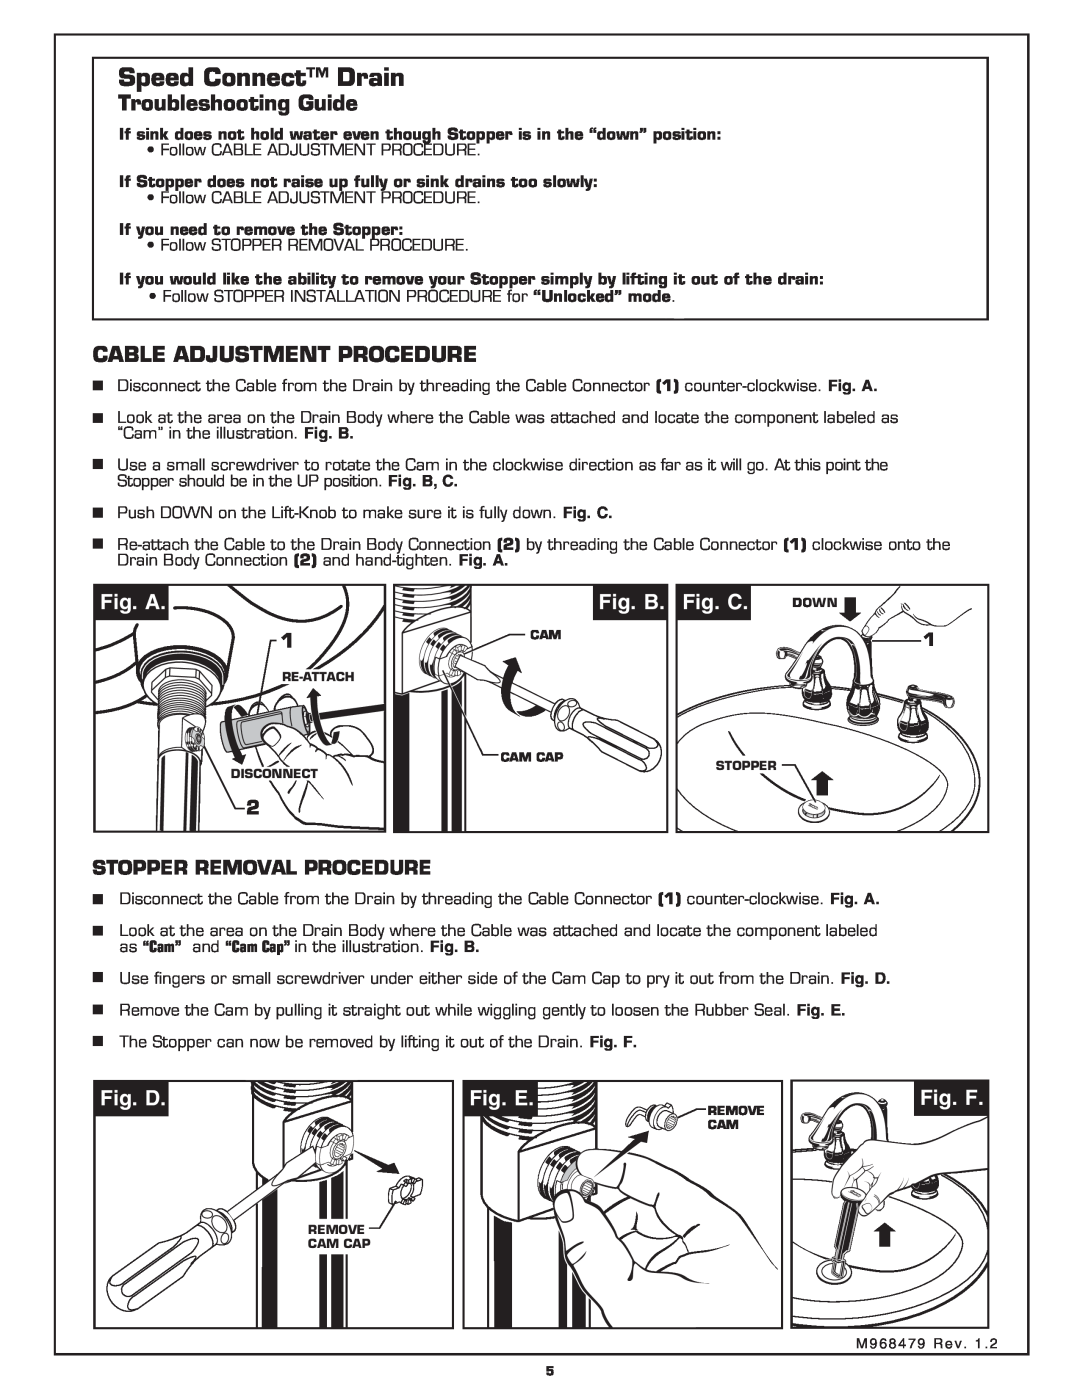 American Standard 6028.801 Troubleshooting Guide, Cable Adjustment Procedure, Fig. A, Fig. B, Fig. C, Fig. D, Fig. E 